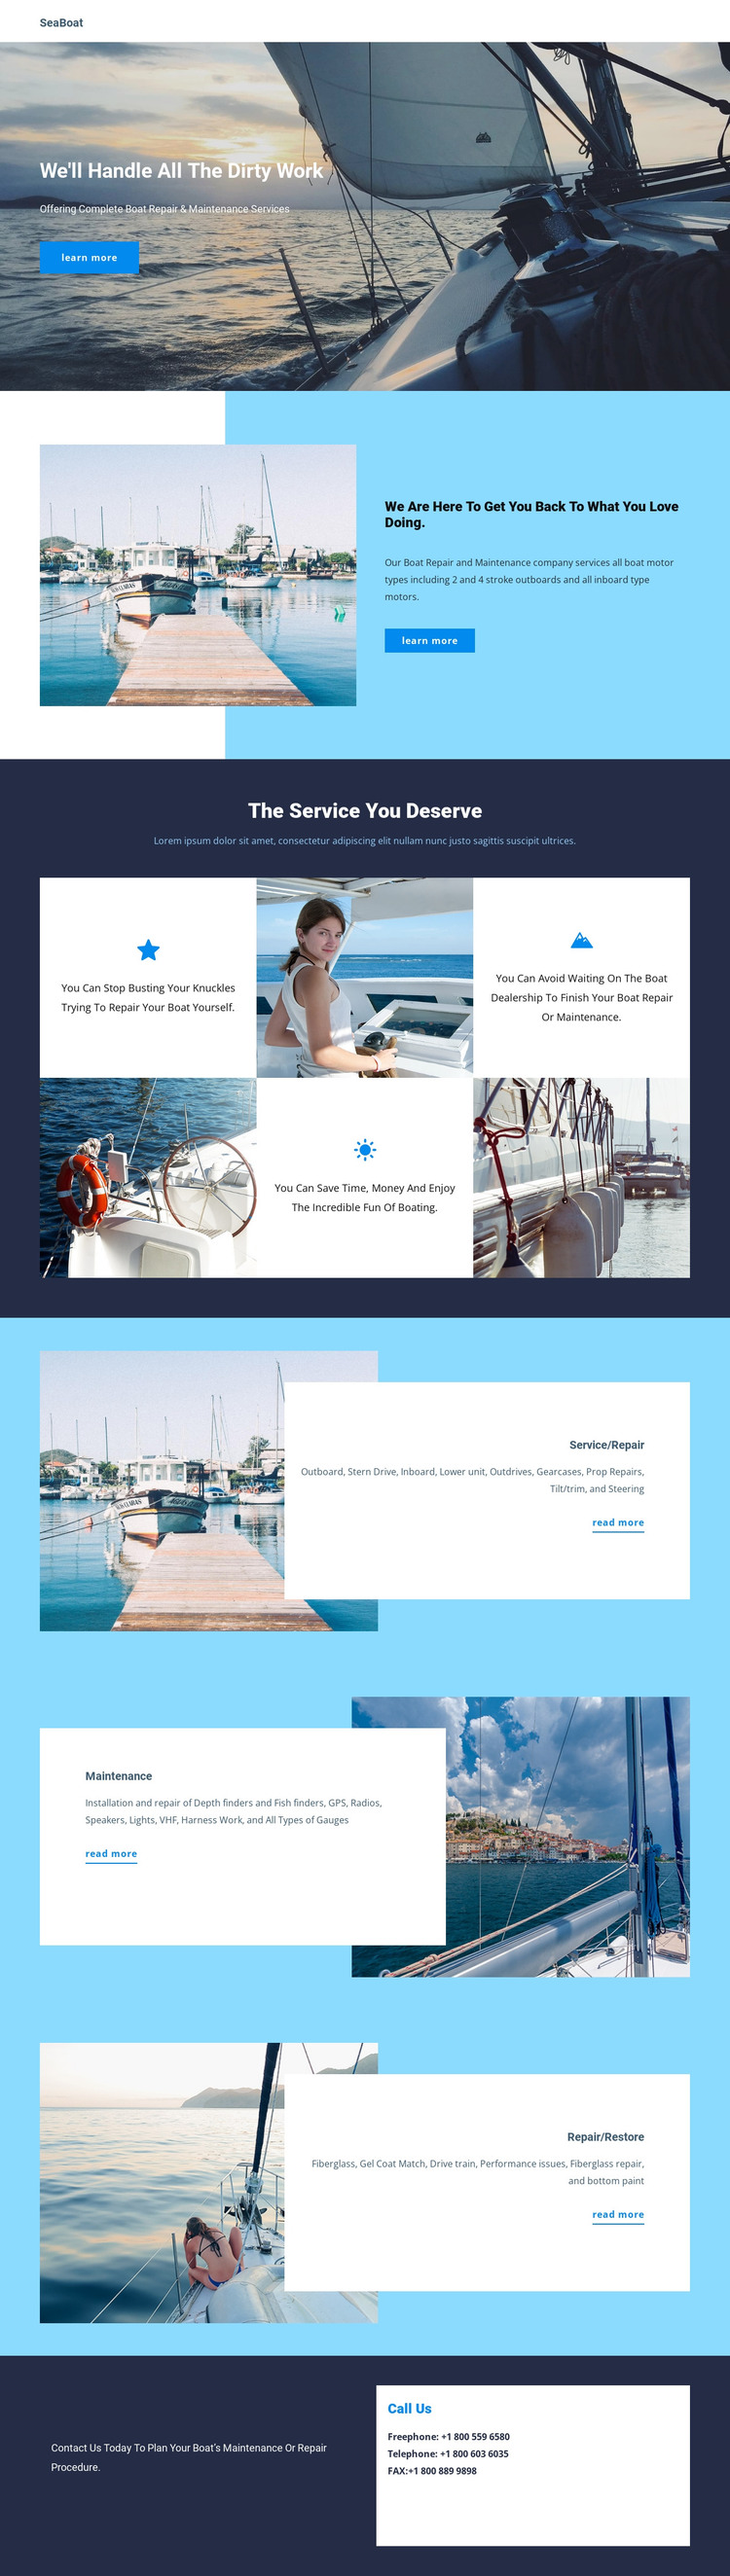 Travel on Seaboat HTML Template